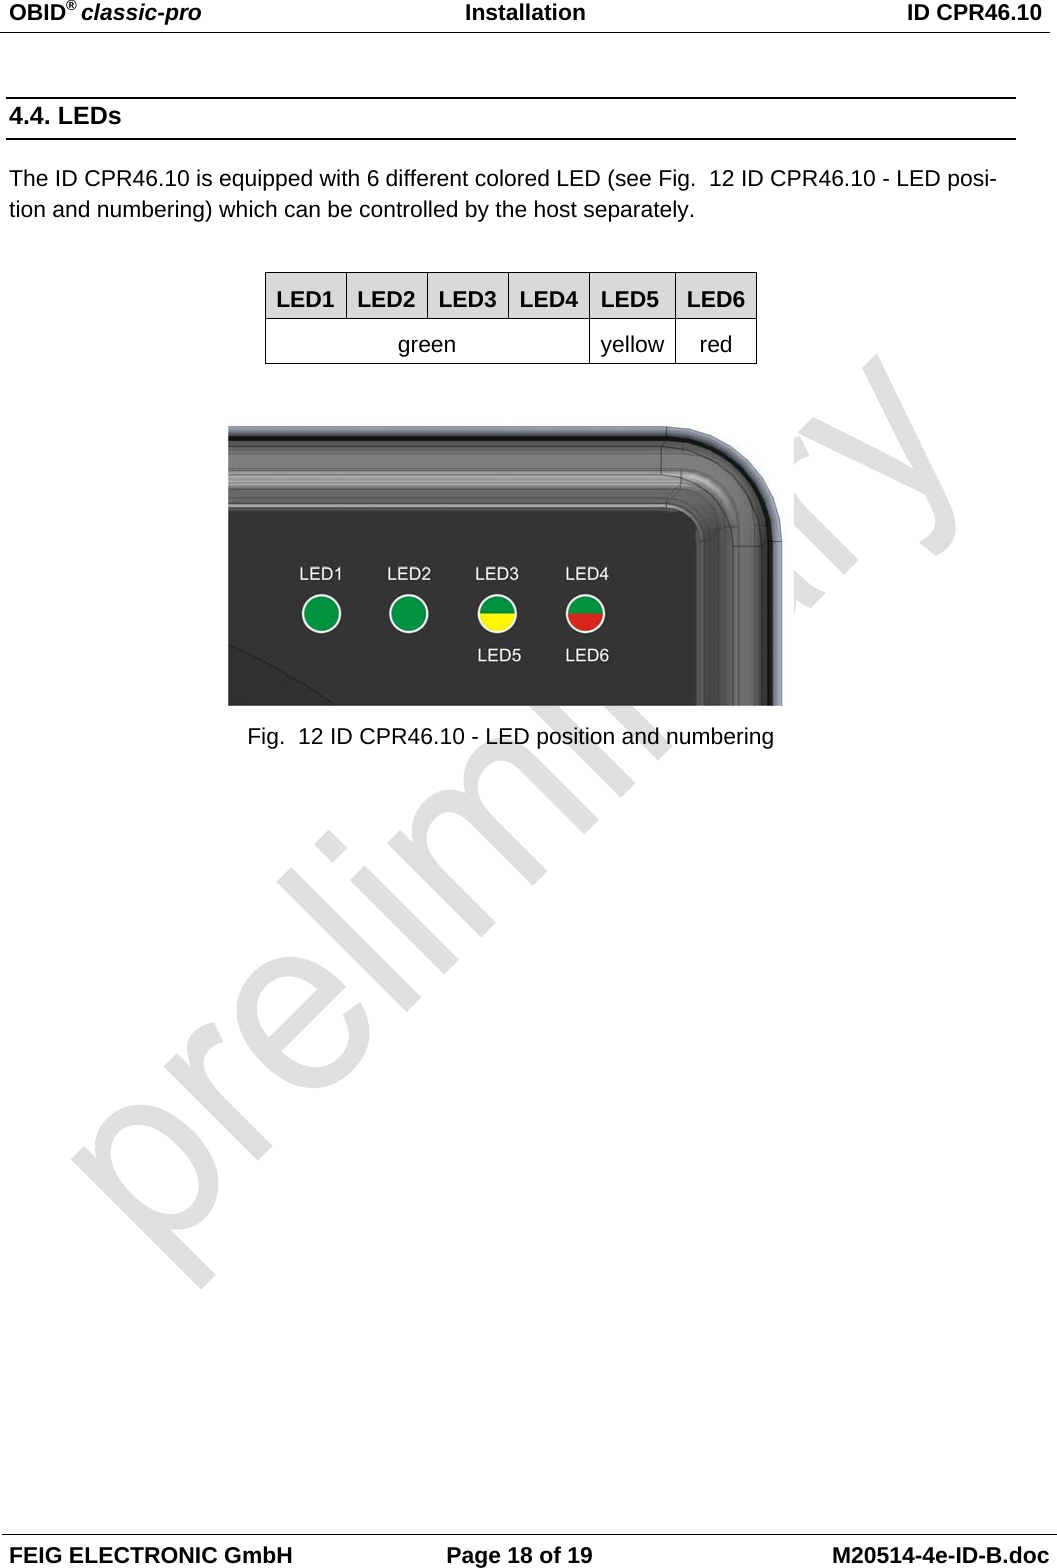 OBID® classic-pro Installation  ID CPR46.10  FEIG ELECTRONIC GmbH  Page 18 of 19  M20514-4e-ID-B.doc  4.4. LEDs The ID CPR46.10 is equipped with 6 different colored LED (see Fig.  12 ID CPR46.10 - LED posi-tion and numbering) which can be controlled by the host separately.   LED1  LED2  LED3  LED4  LED5  LED6 green yellow red   Fig.  12 ID CPR46.10 - LED position and numbering 